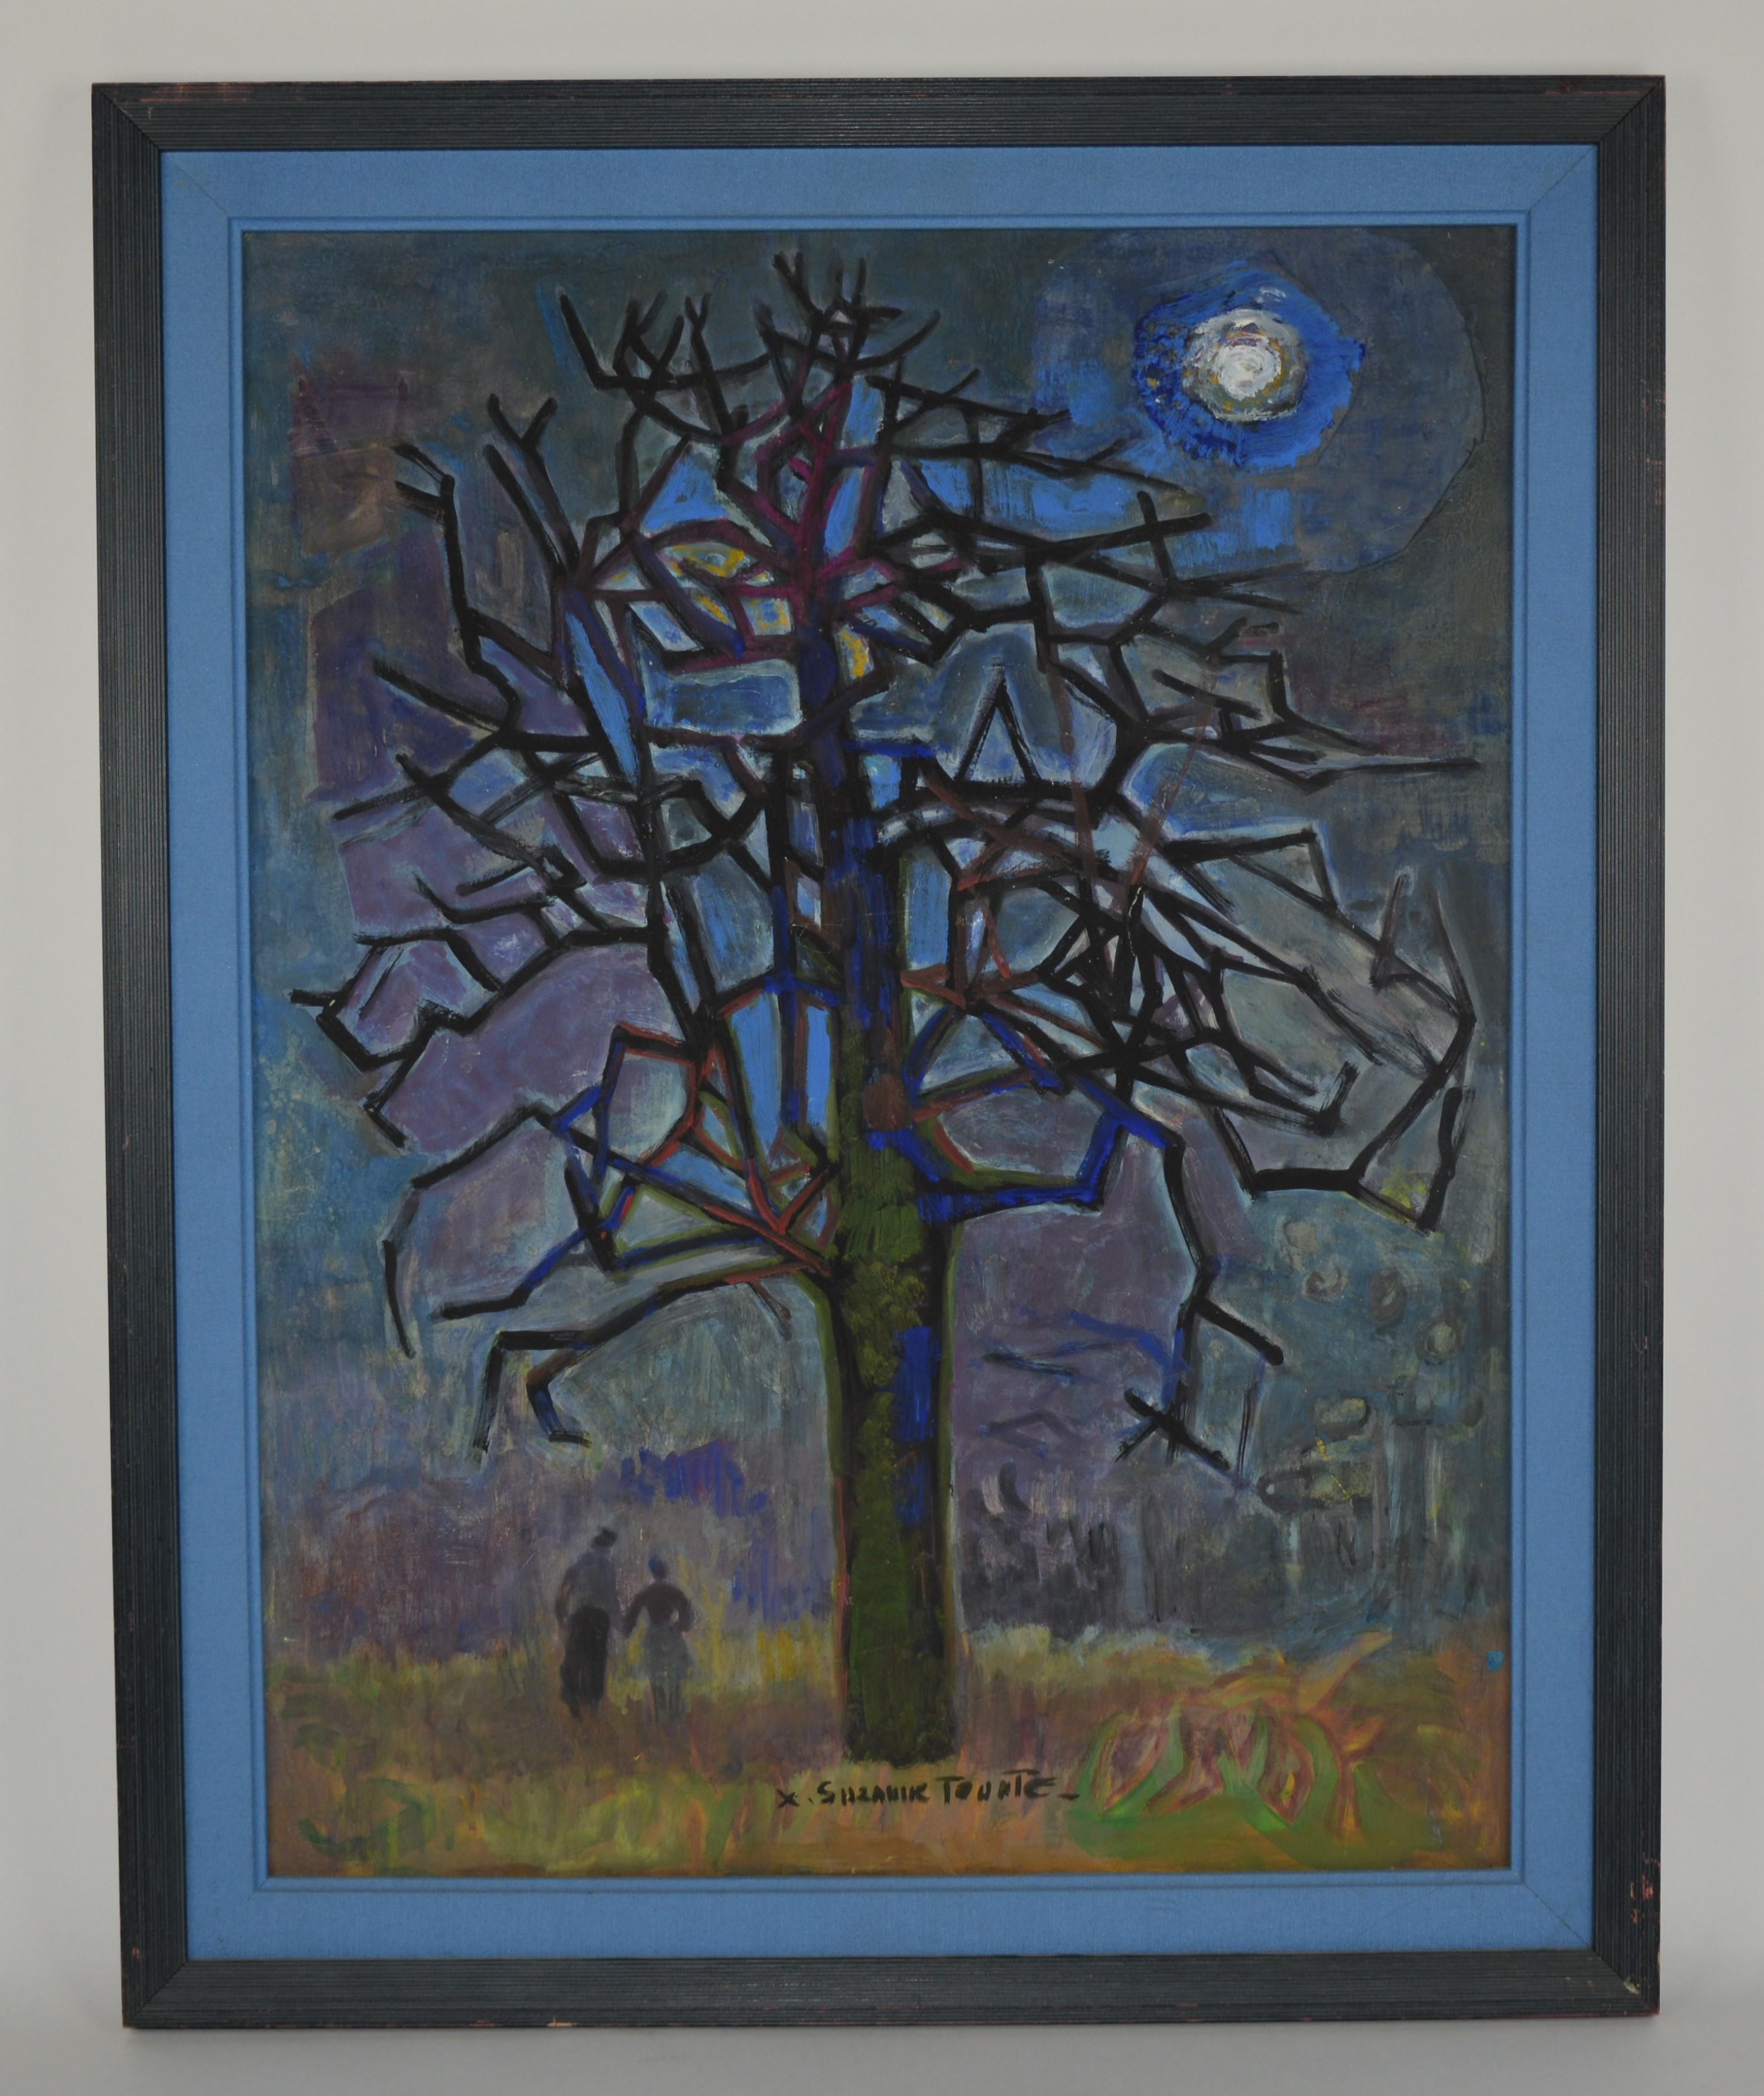 Suzanne Tourte Figurative Painting – Pear Tree under the Moon